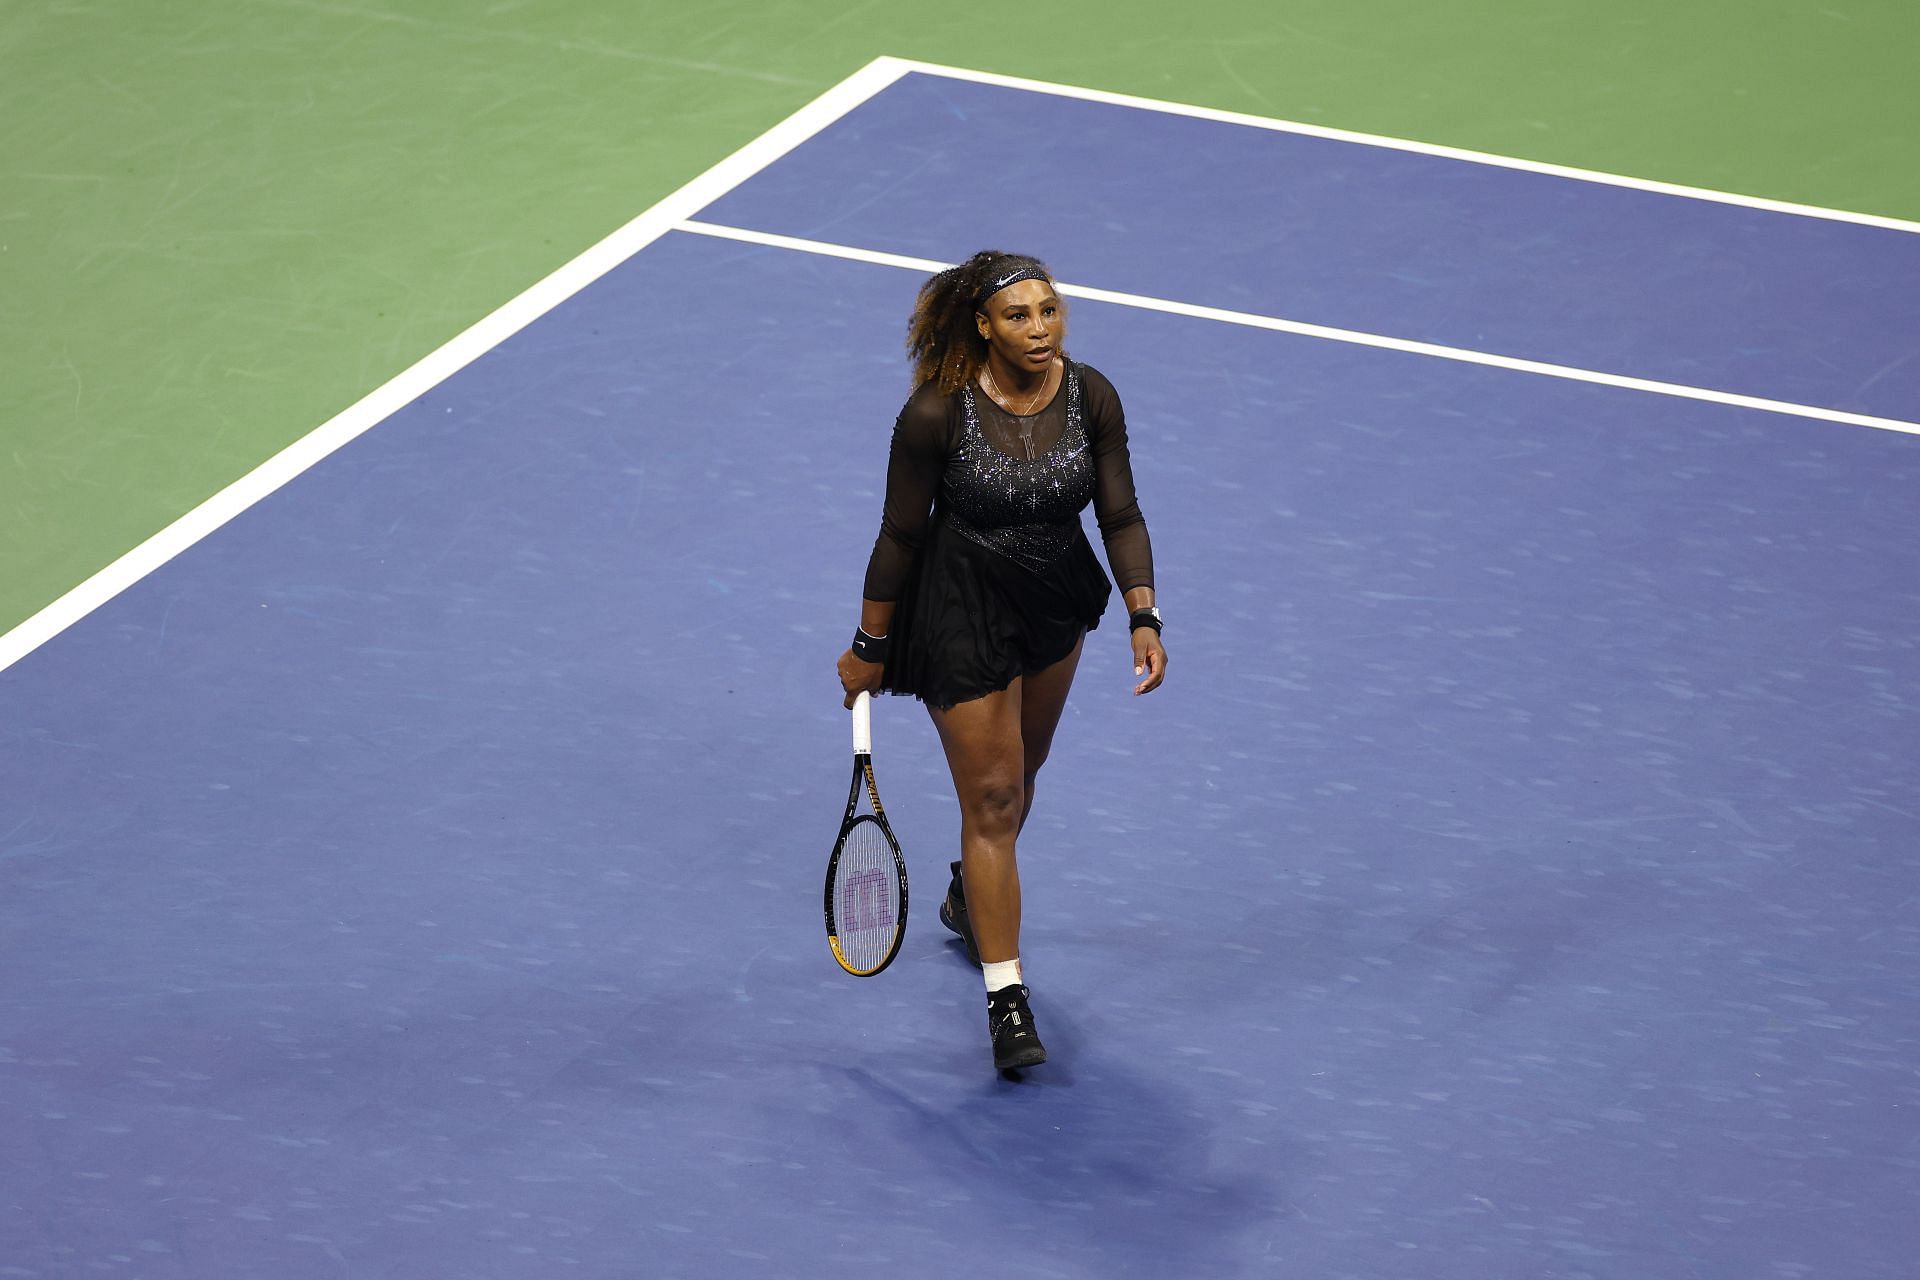 Serena Williams will be up against Anett Kontaveit in the second round